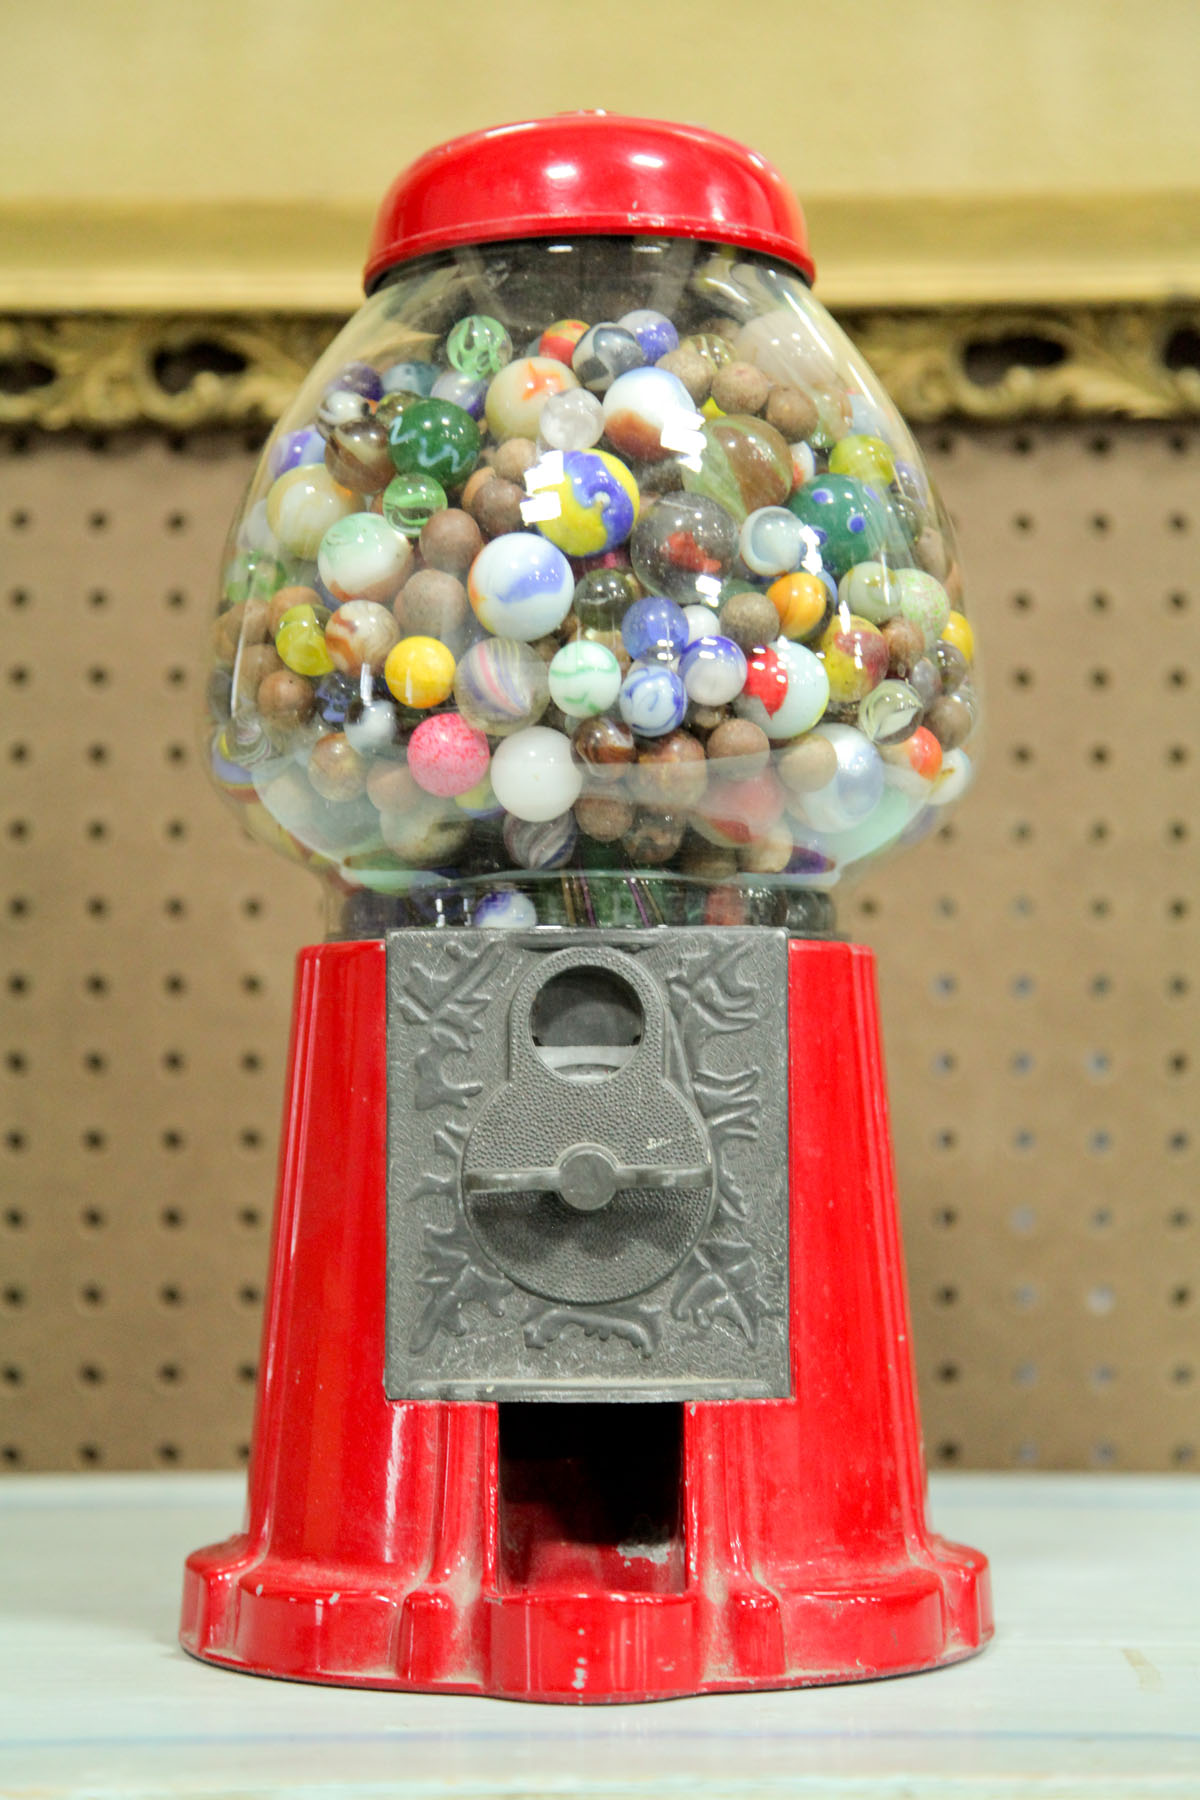 BUBBLEGUM MACHINE FILLED WITH OLD MARBLES.